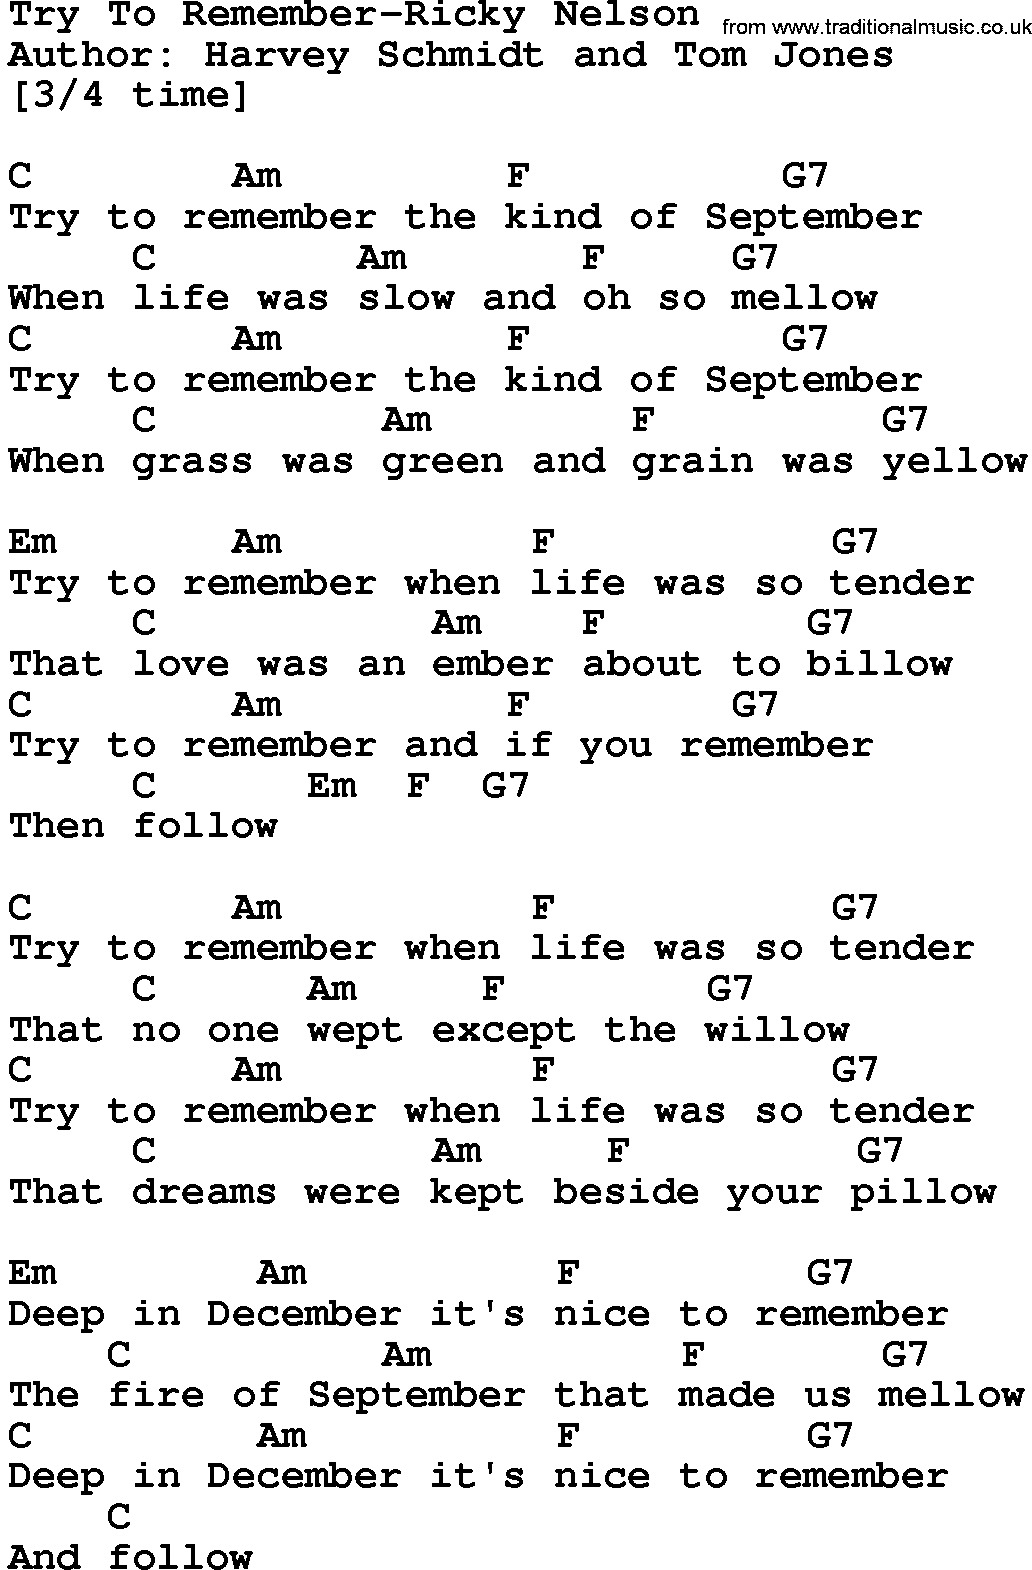 Country music song: Try To Remember-Ricky Nelson lyrics and chords